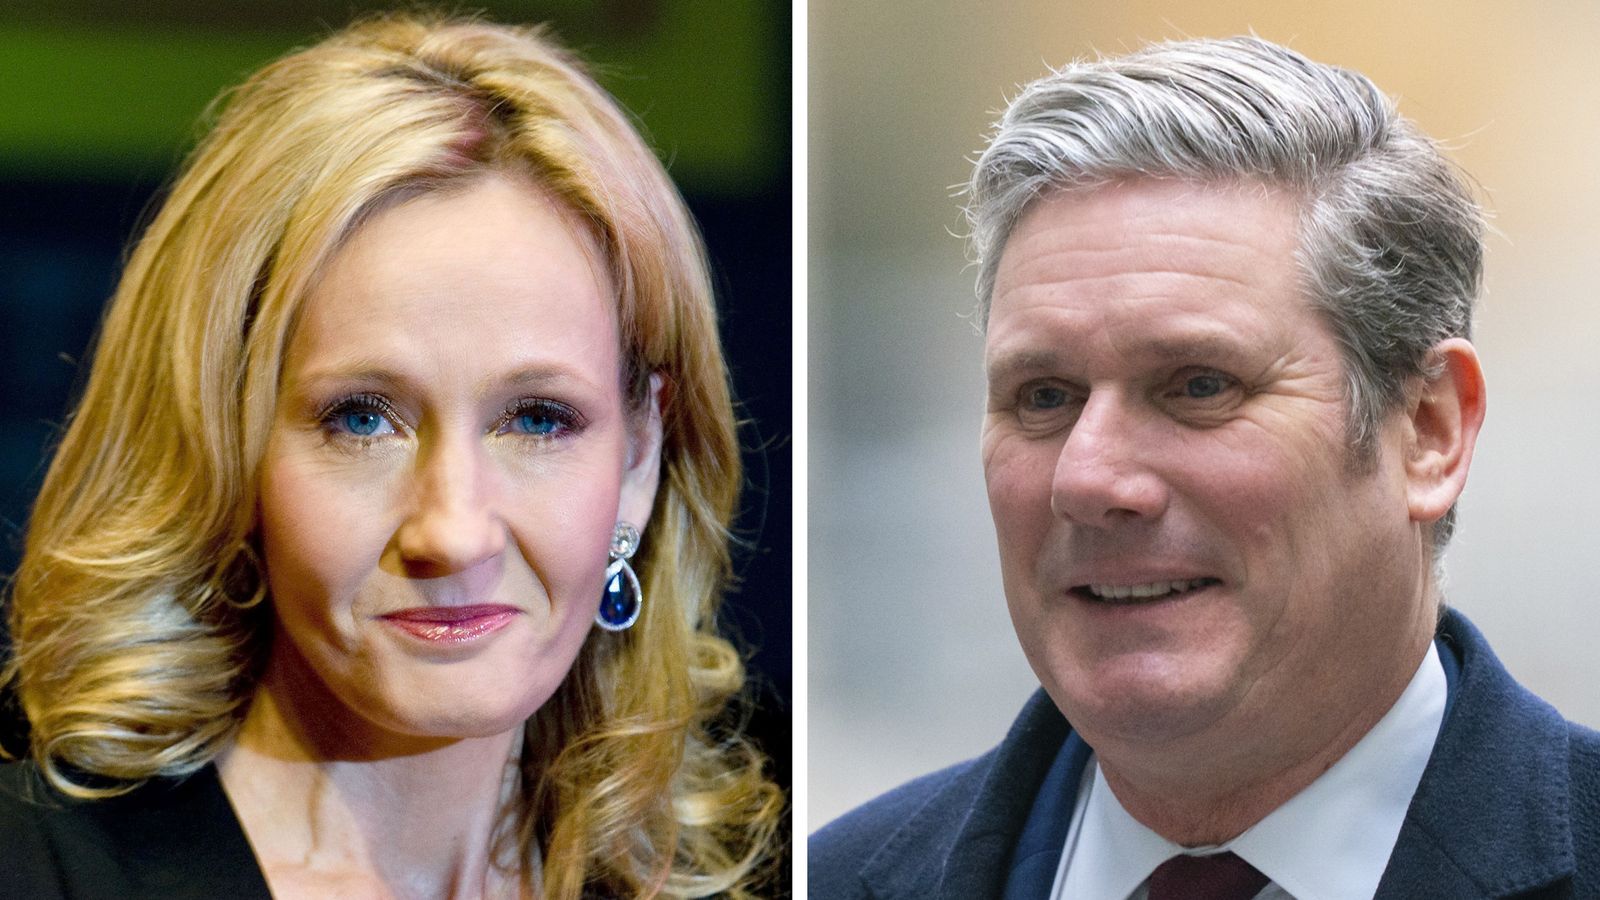 Starmer defends record after JK Rowling says Labour 'abandoned women'